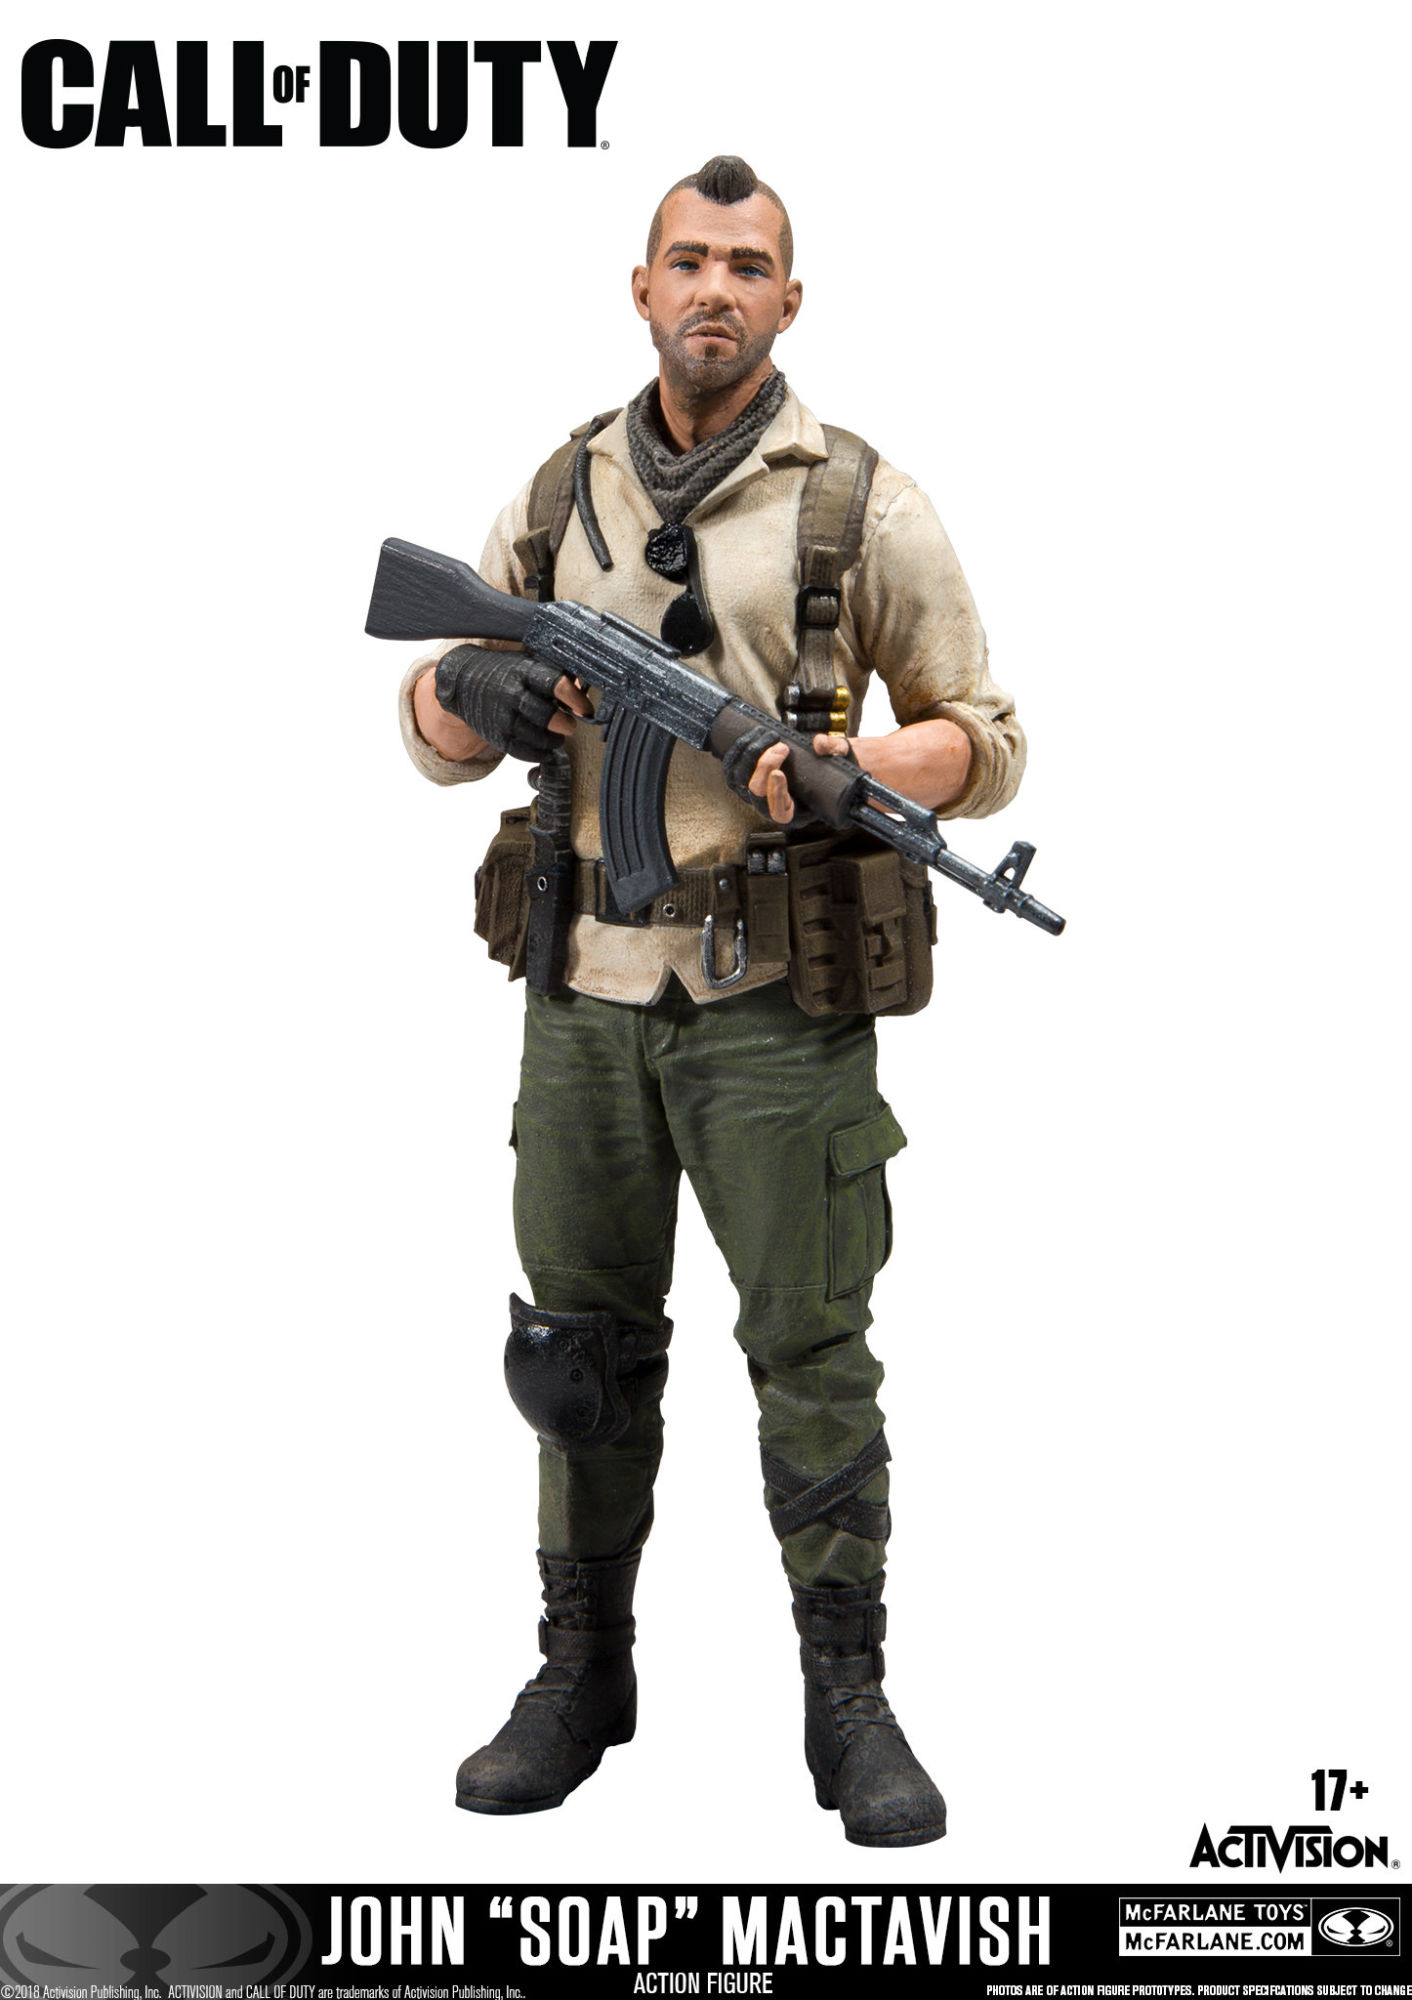  McFarlane Toys Call of Duty Ghost 2 Action Figure : Toys & Games